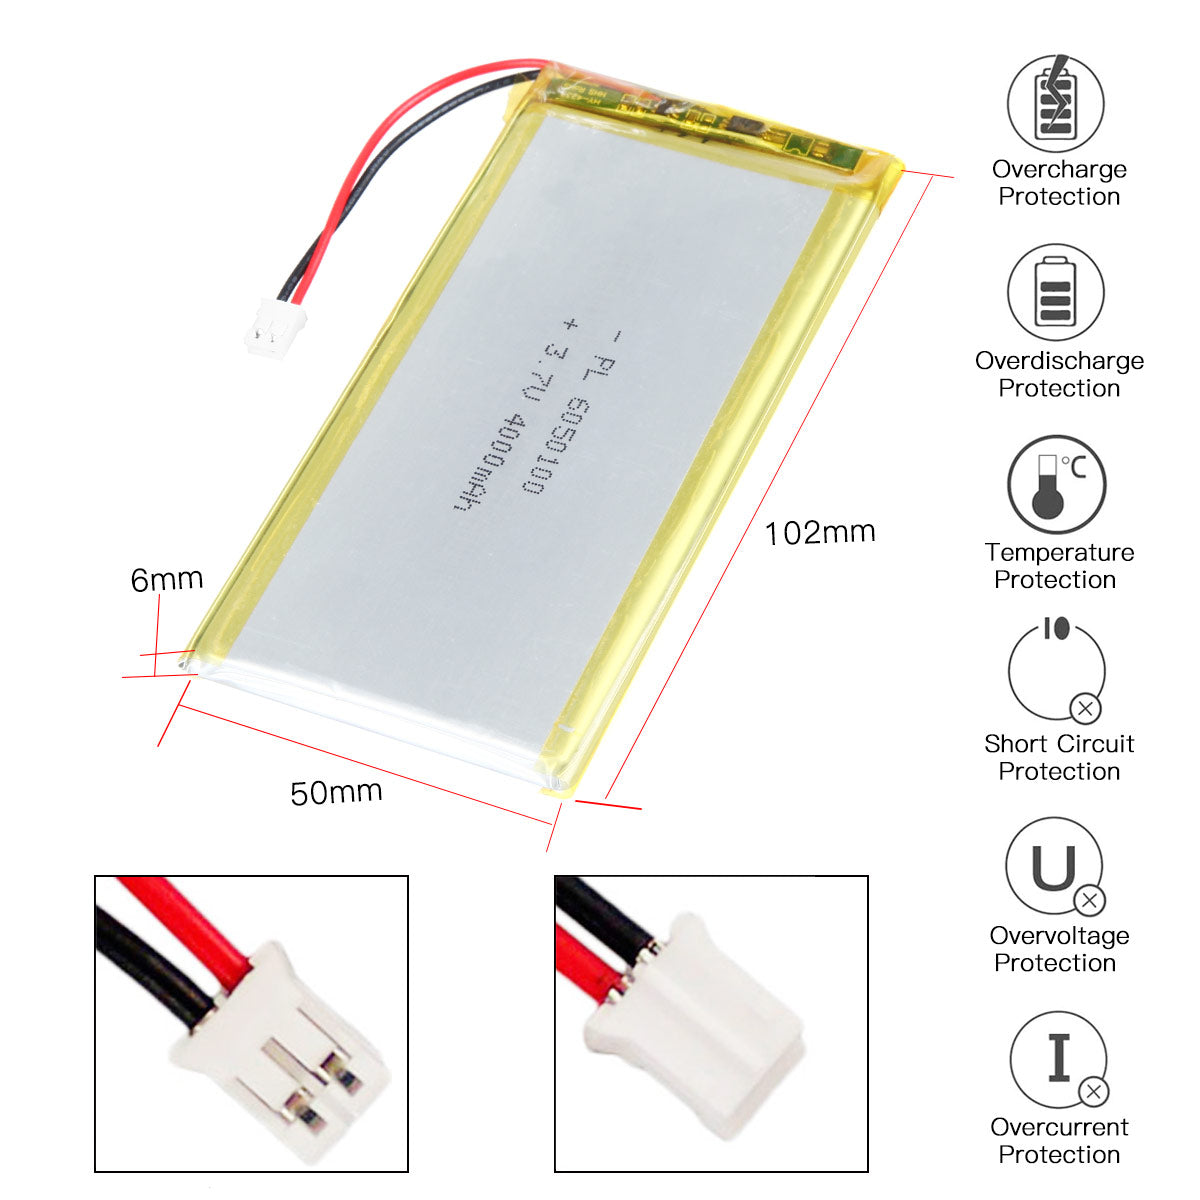 YDL 3.7V 4000mAh 6050100 Rechargeable Lithium Polymer Battery